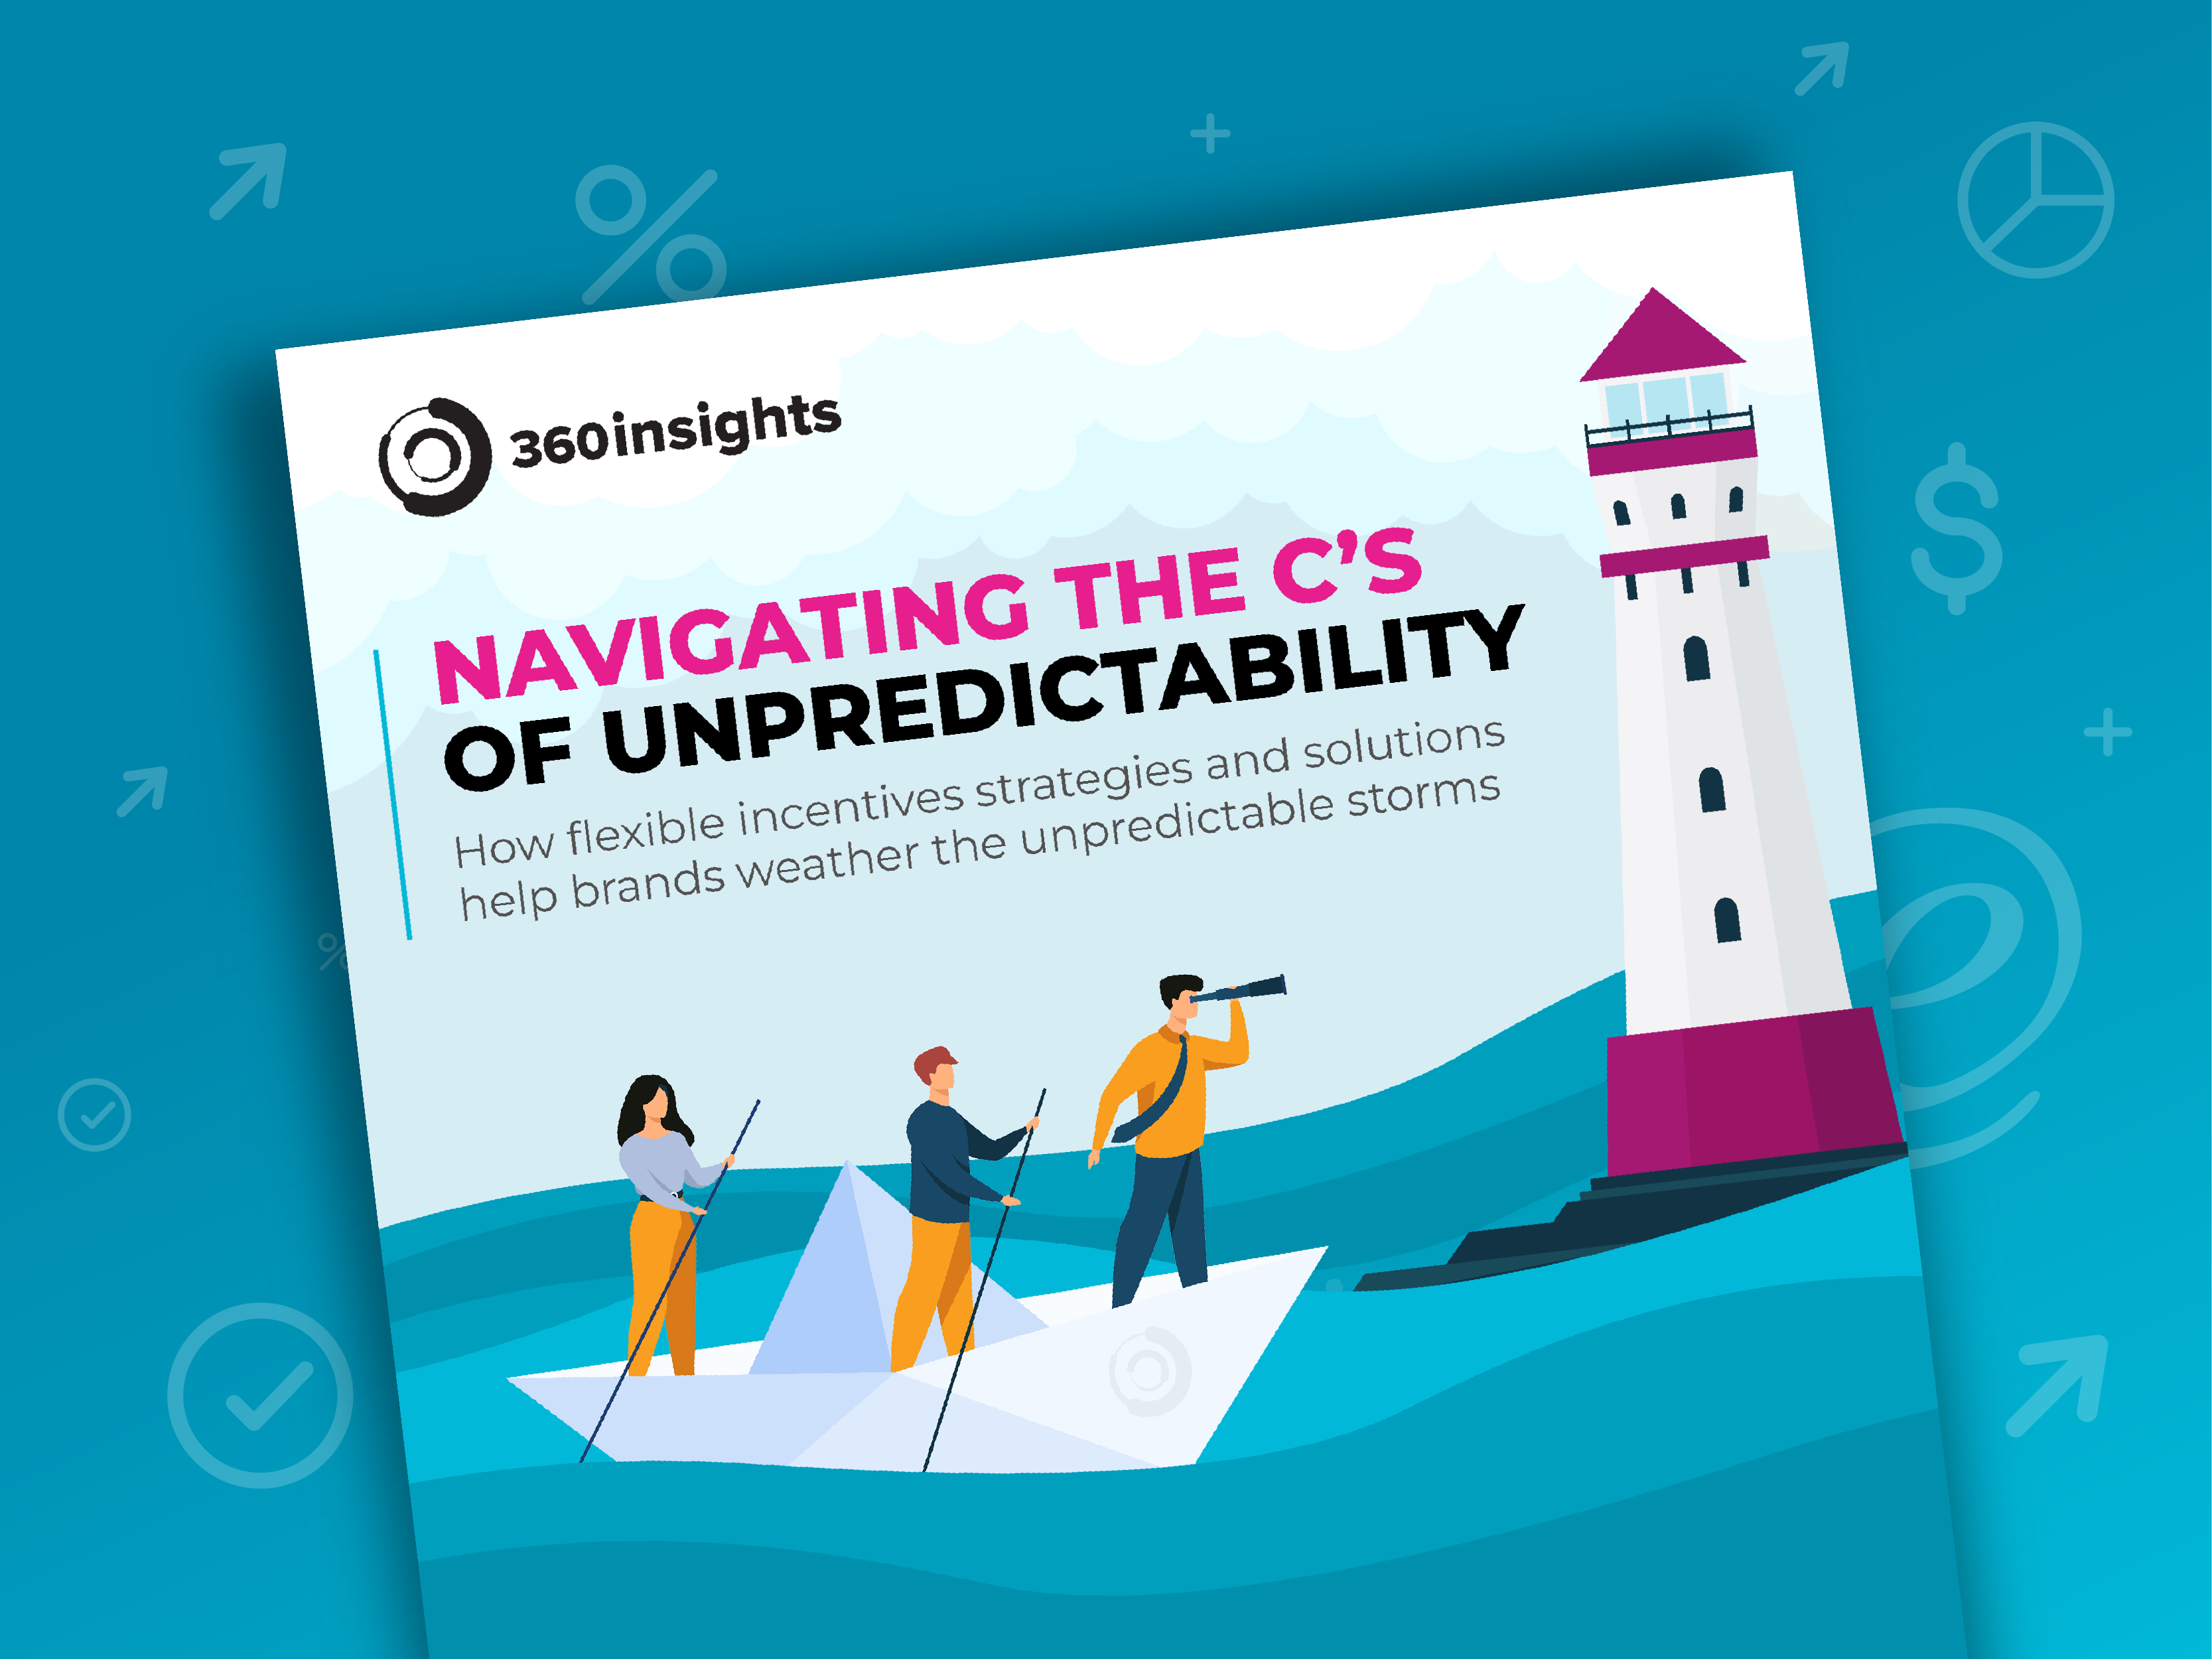 eBook about Navigating the C's of Unpredictability